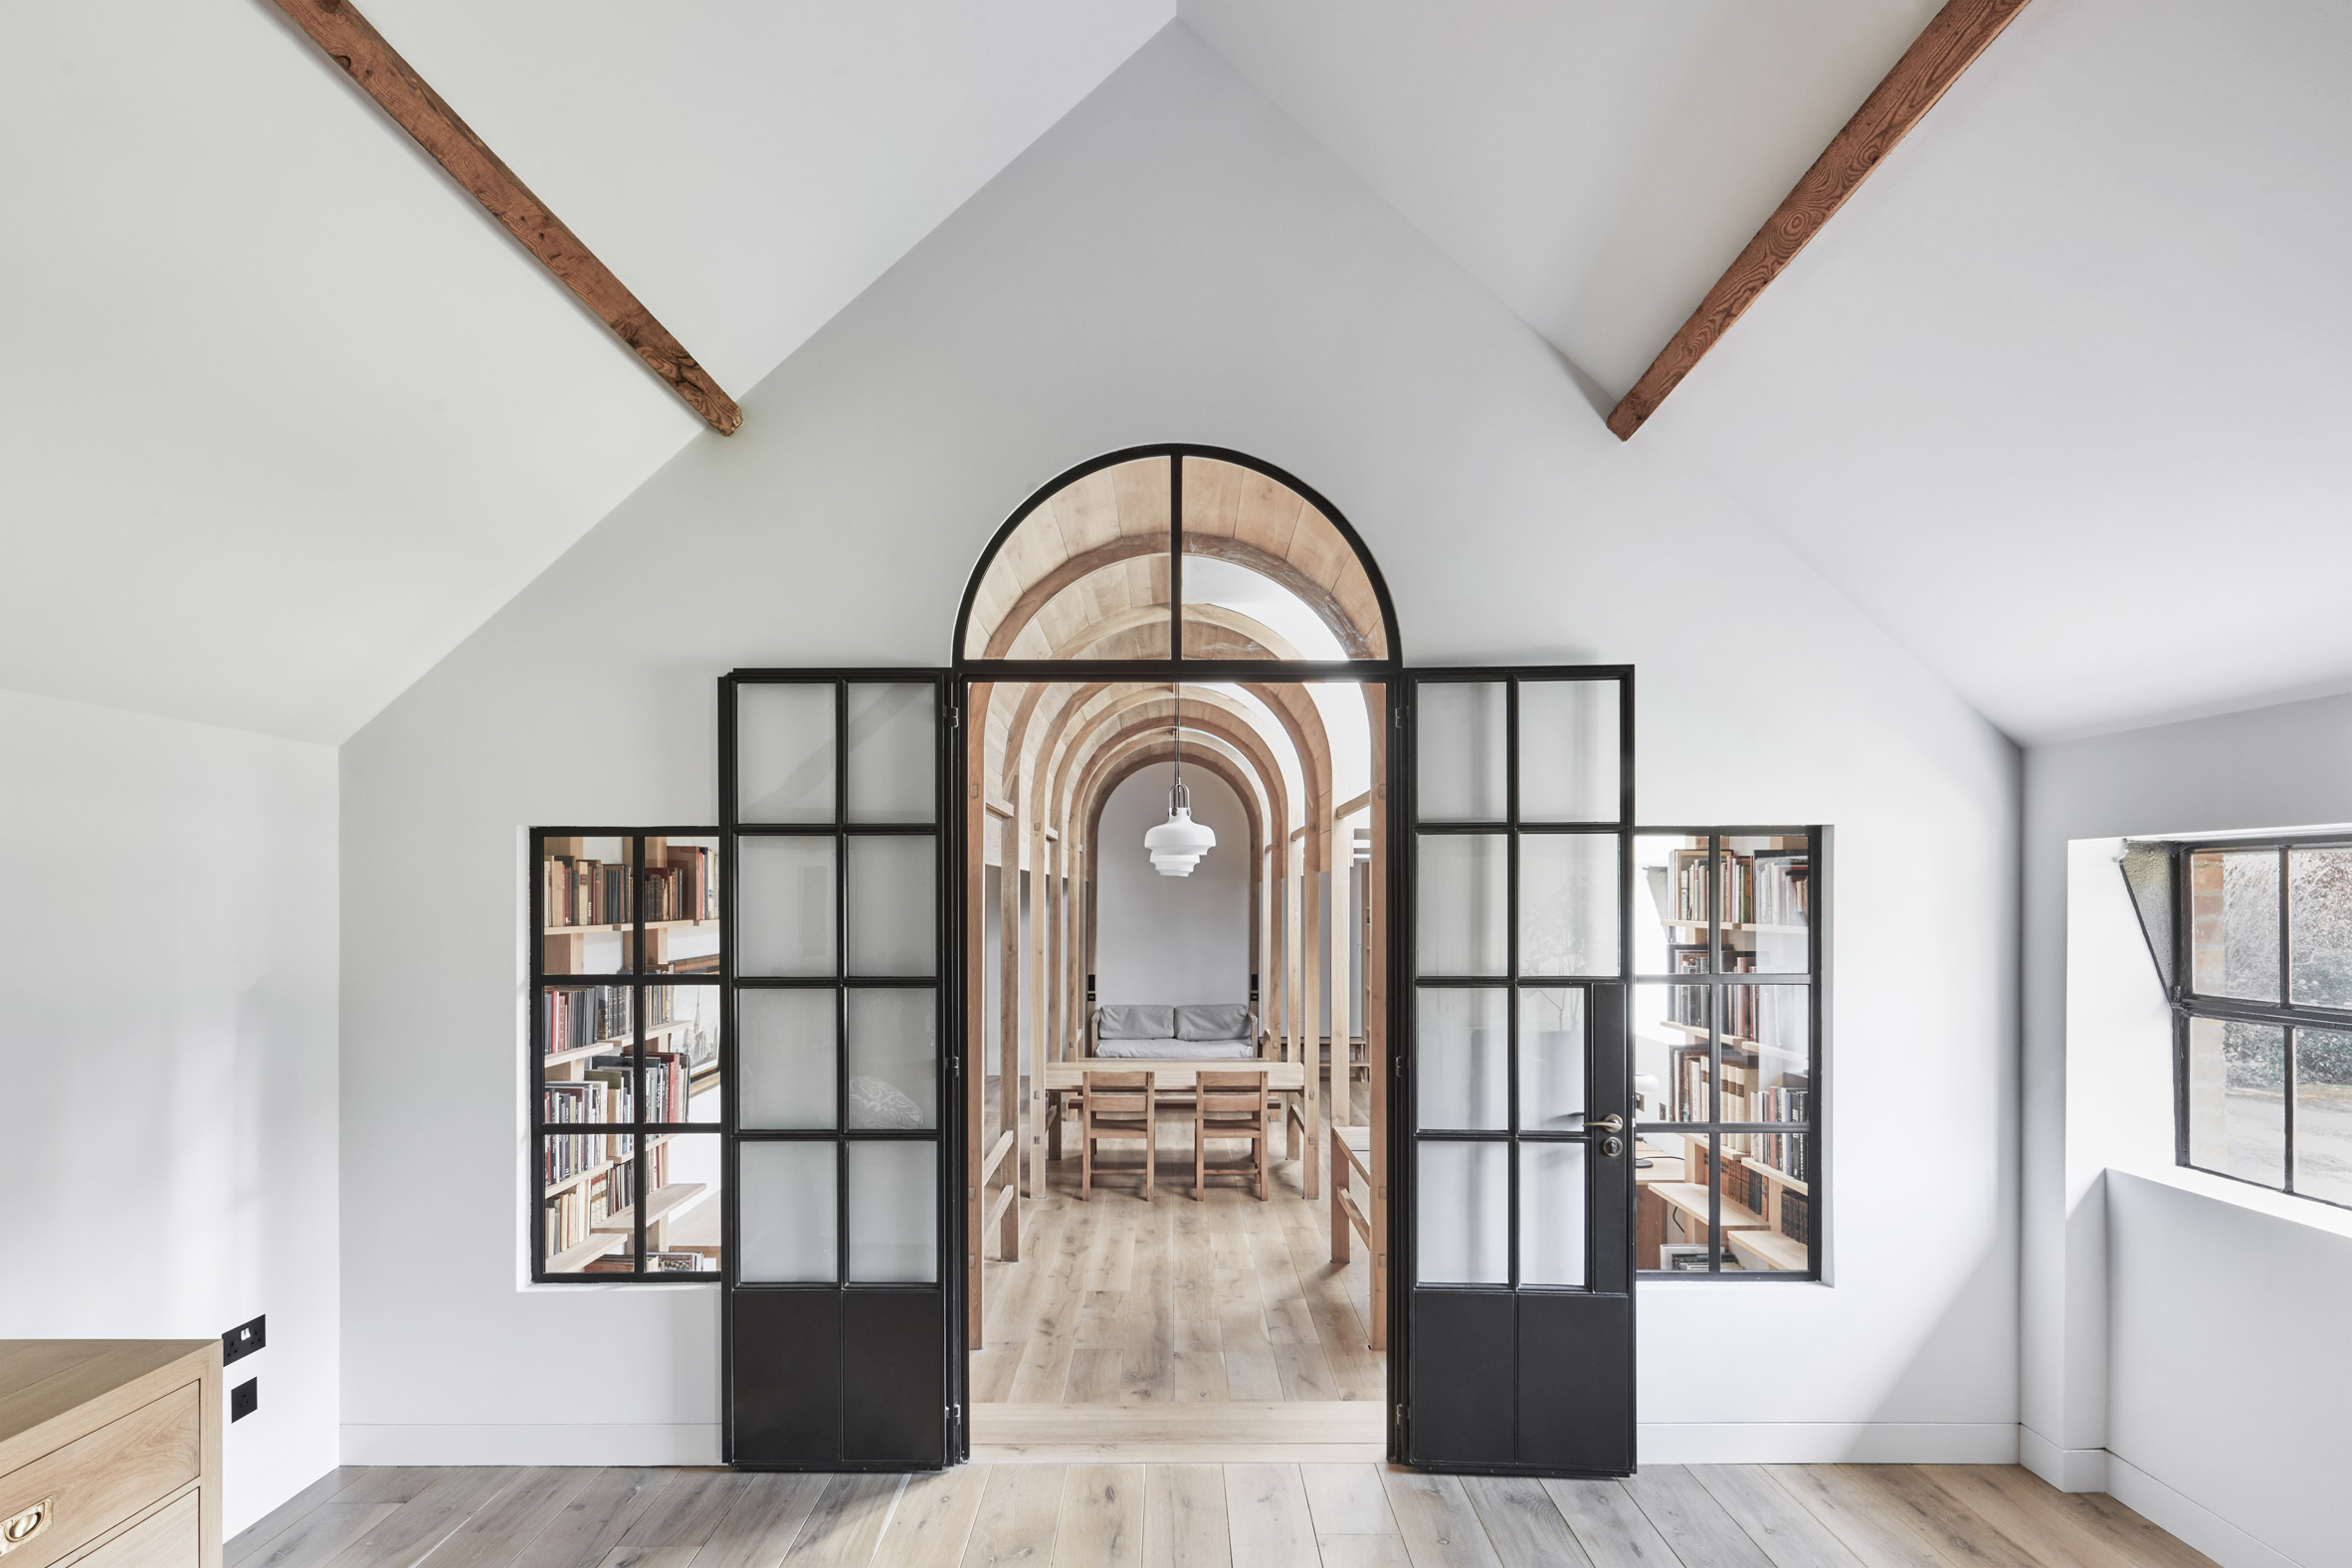 White-walled room in Stanbridge Mill Library by Crawshaw Architects